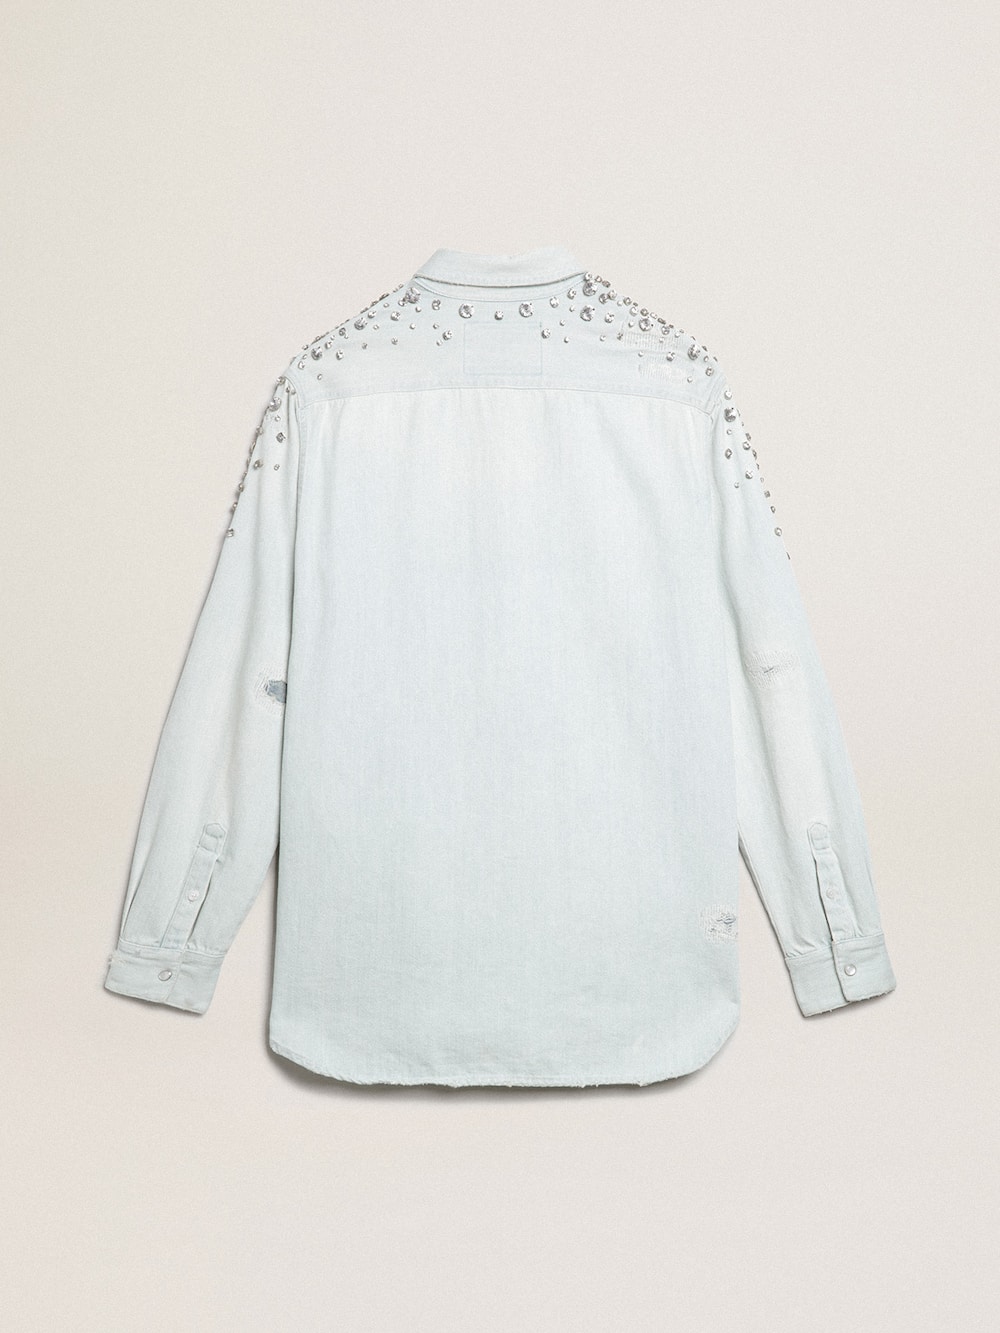 Golden Goose - Women's bleached boyfriend shirt with cabochon crystals in 